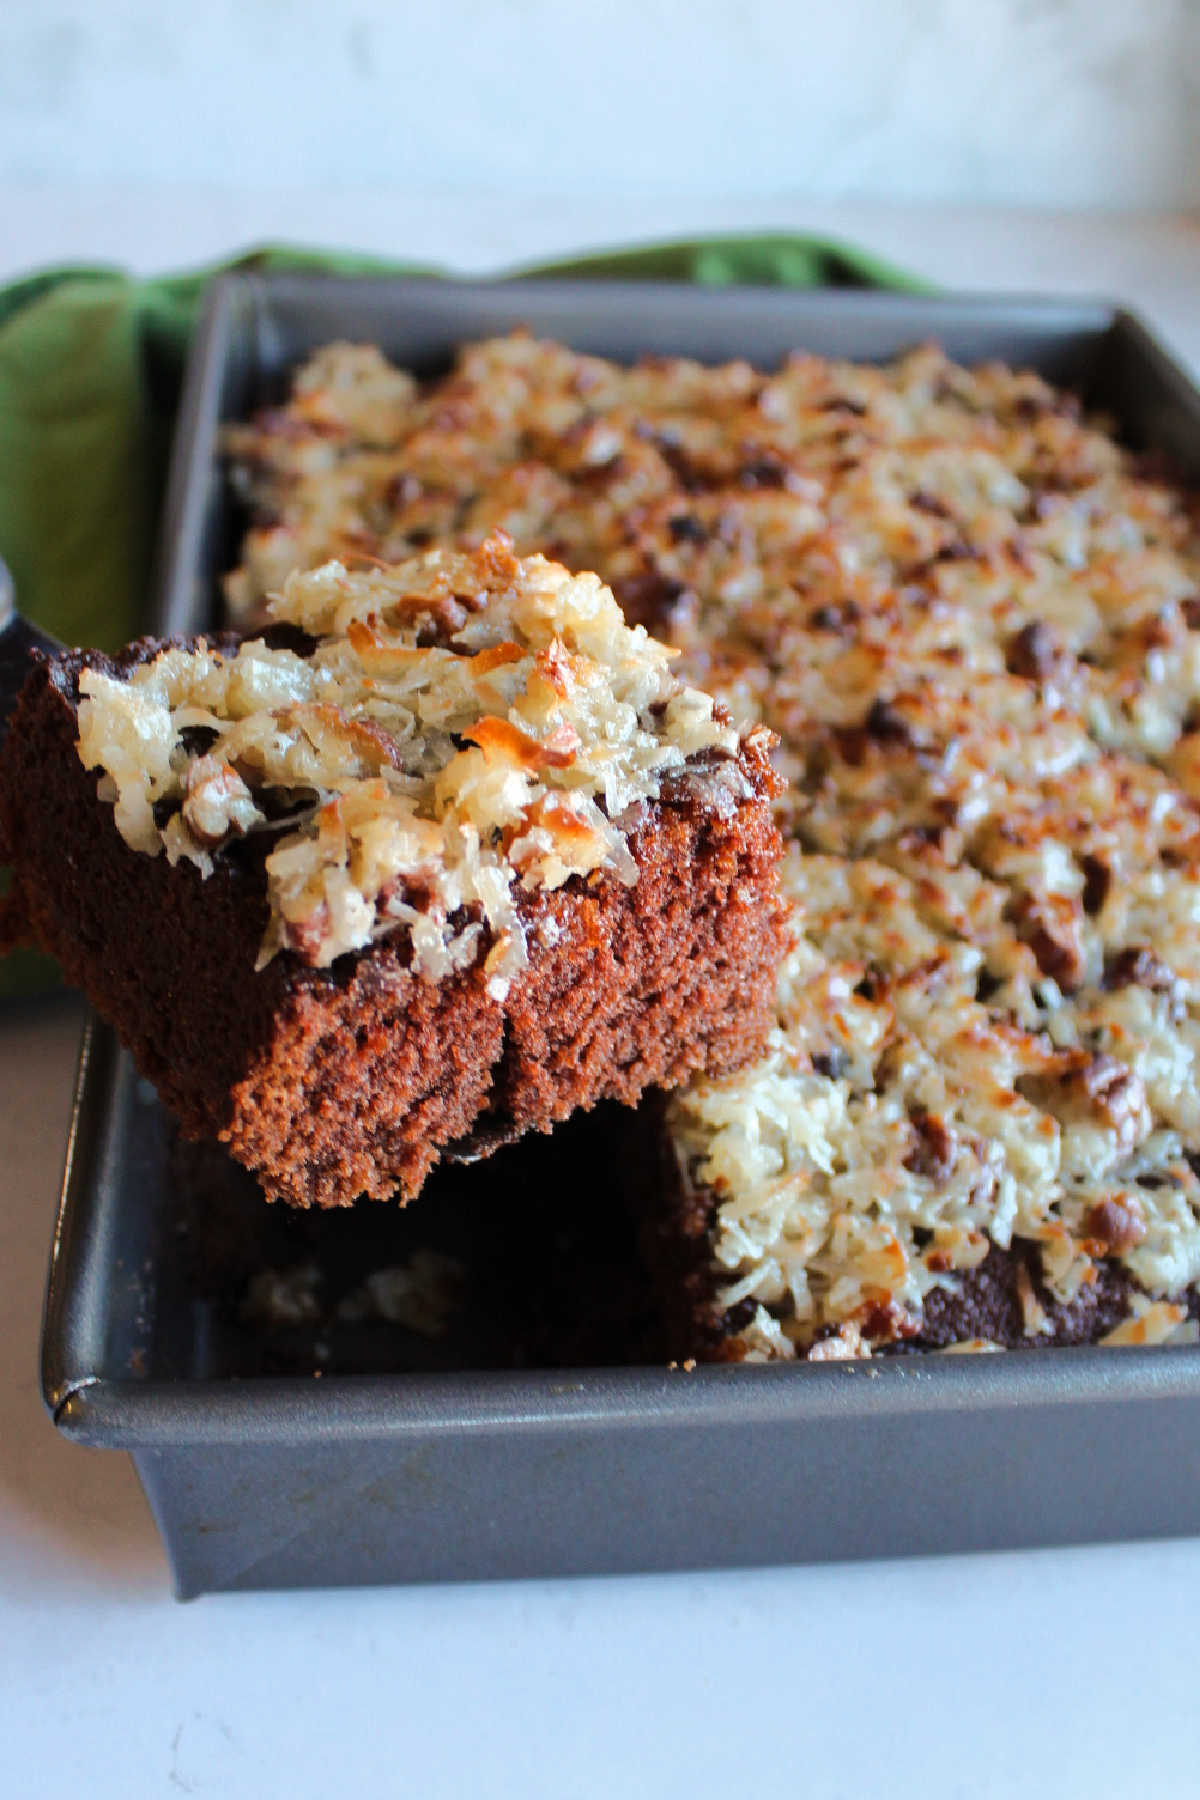 Lifting first piece of German chocolate cake with broiled coconut frosting out of cake pan.